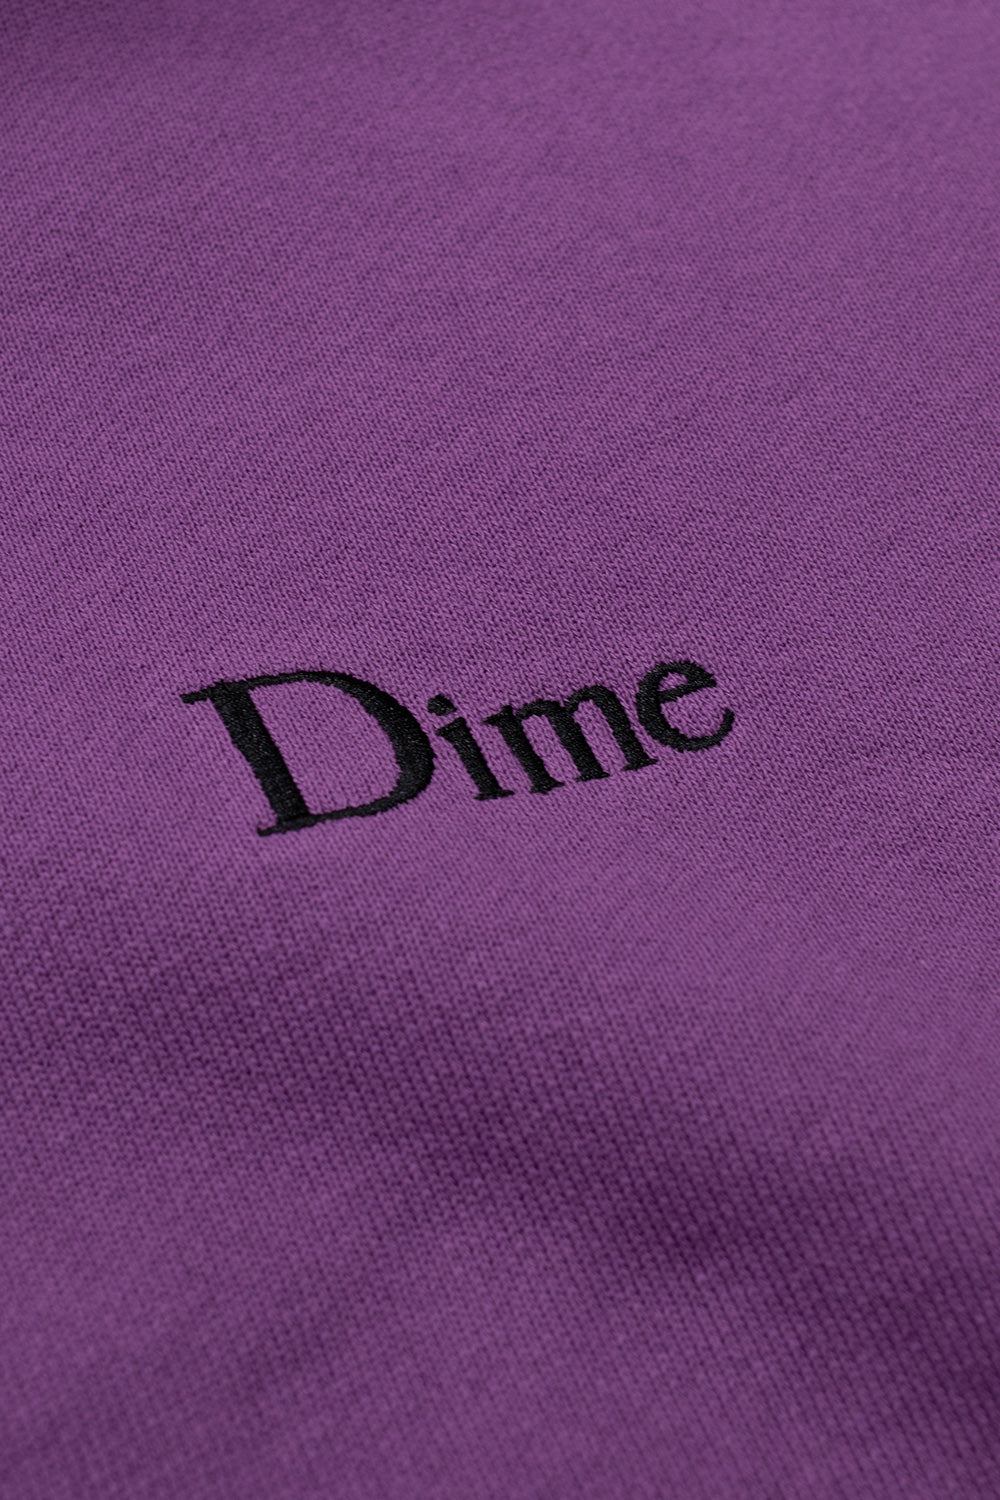 Dime Classic Small Logo Hoodie Violet - BONKERS